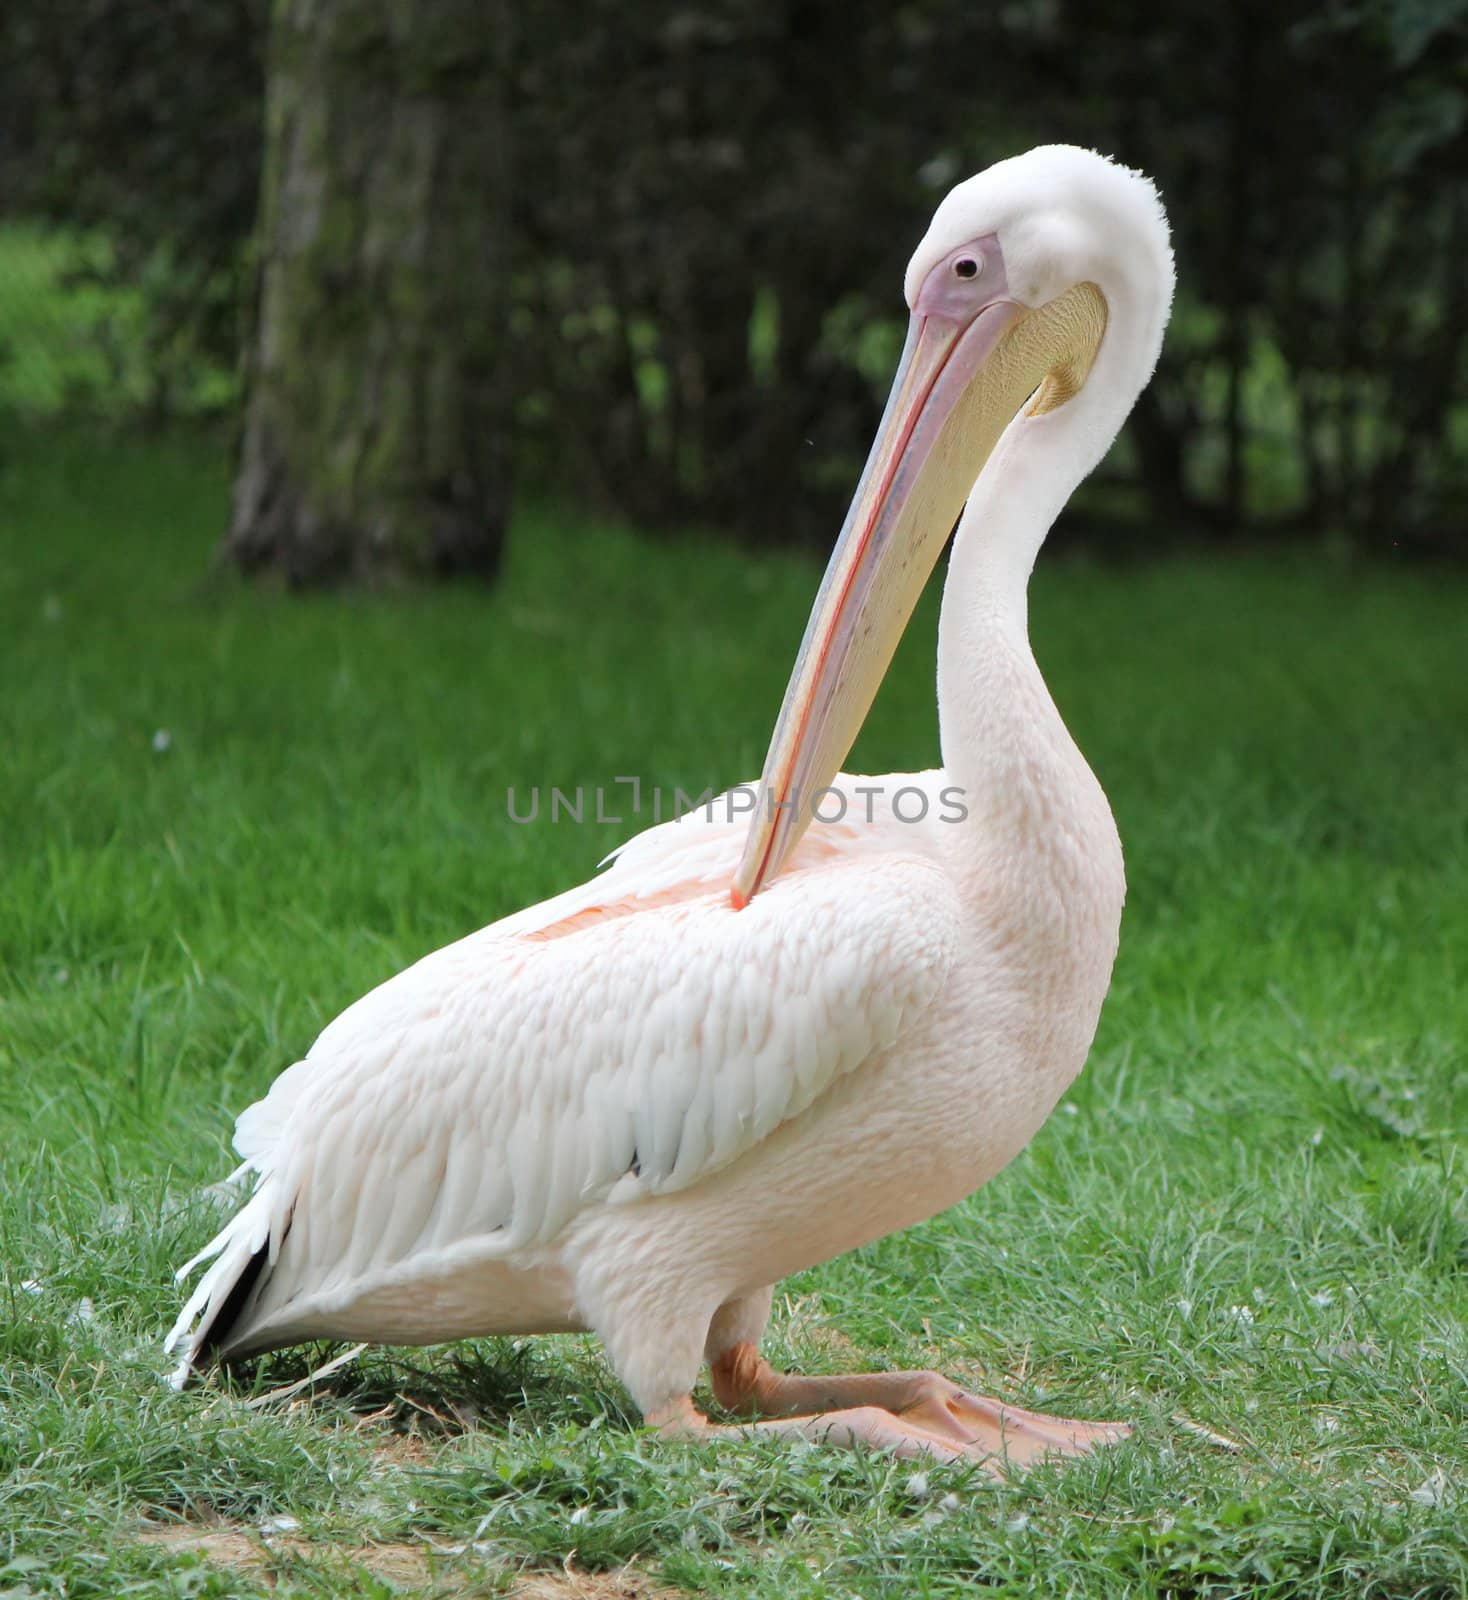 Pelican sitting on the grass by Elenaphotos21